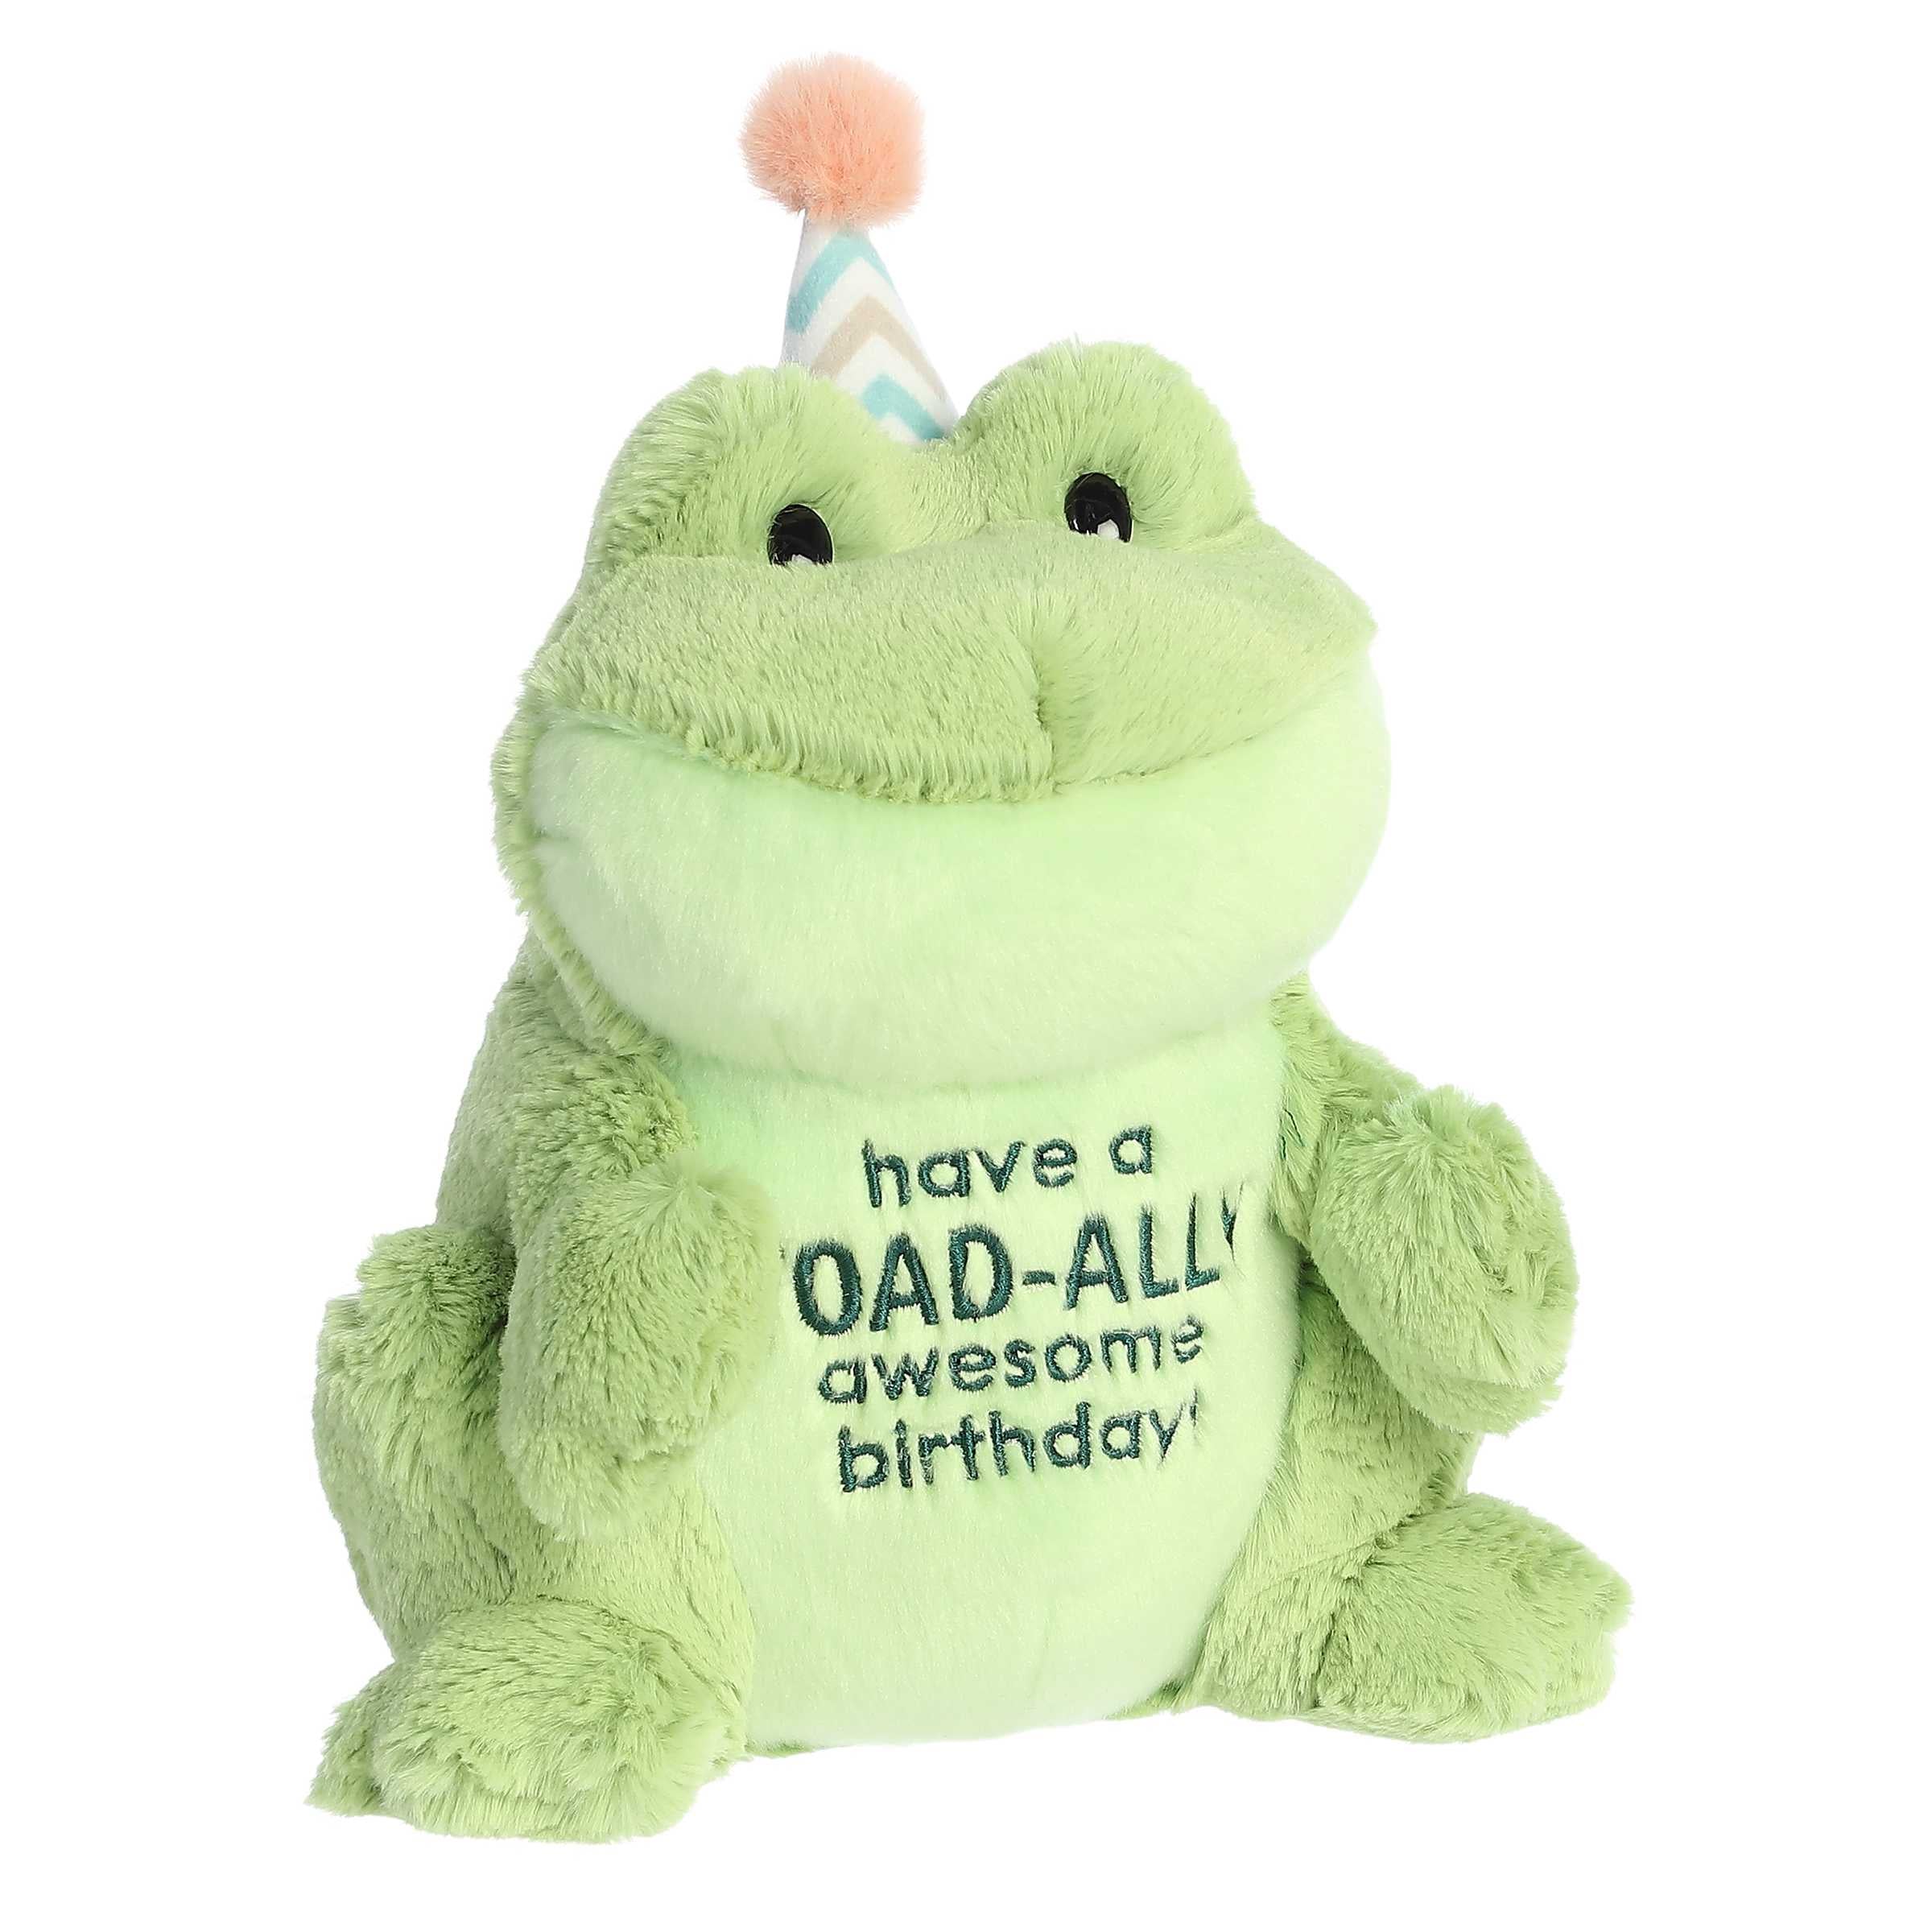 Aurora® - JUST SAYIN'™ - 10 Toad-Ally Awesome Birthday™